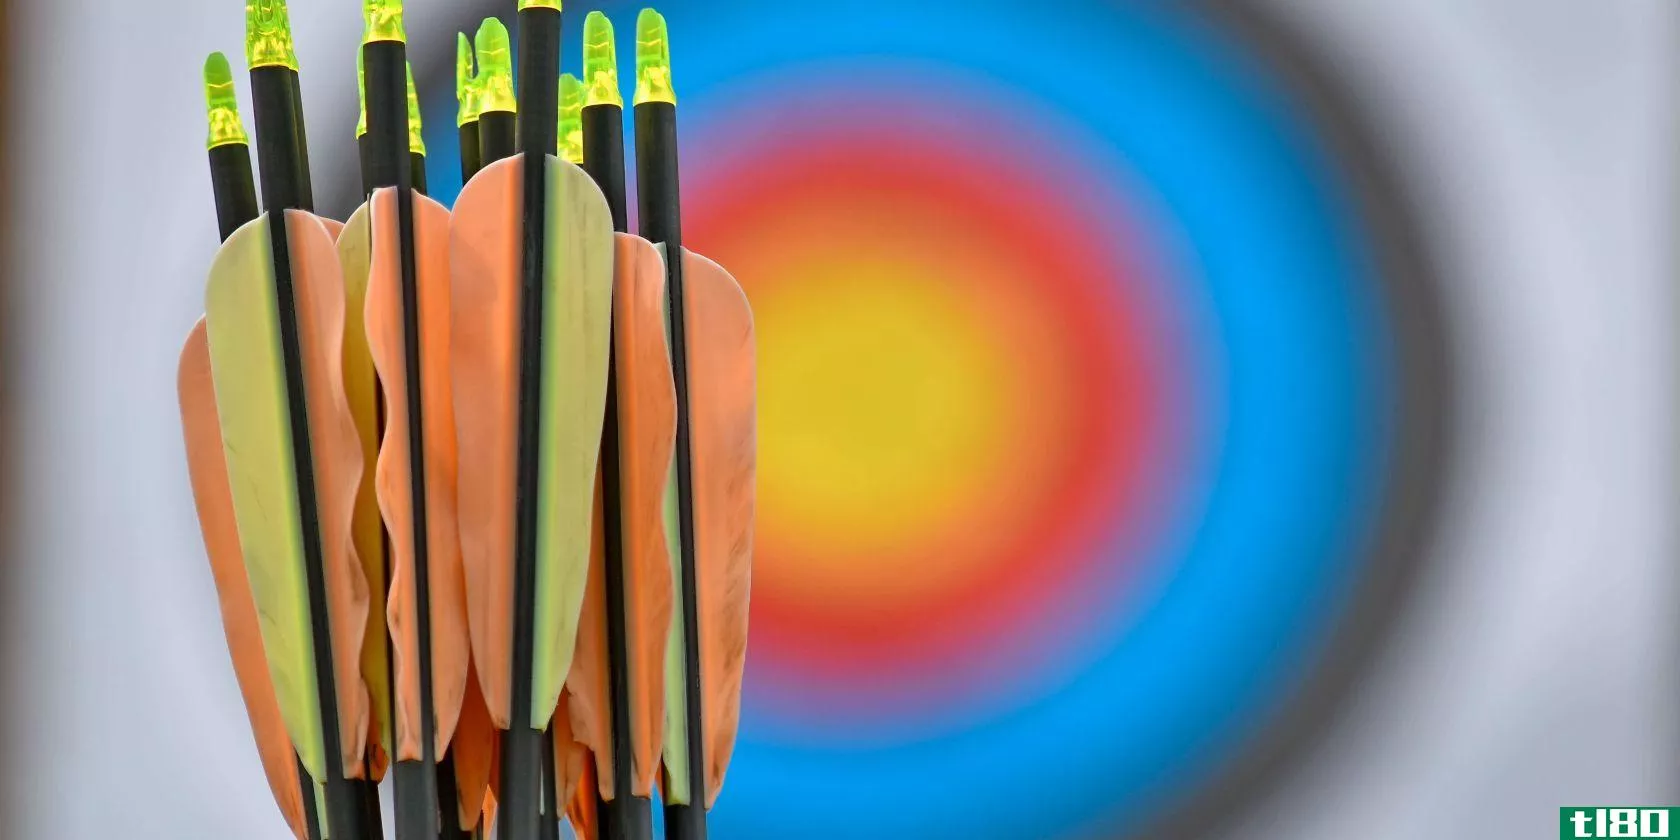 Arrow Fletchings With Target in Background